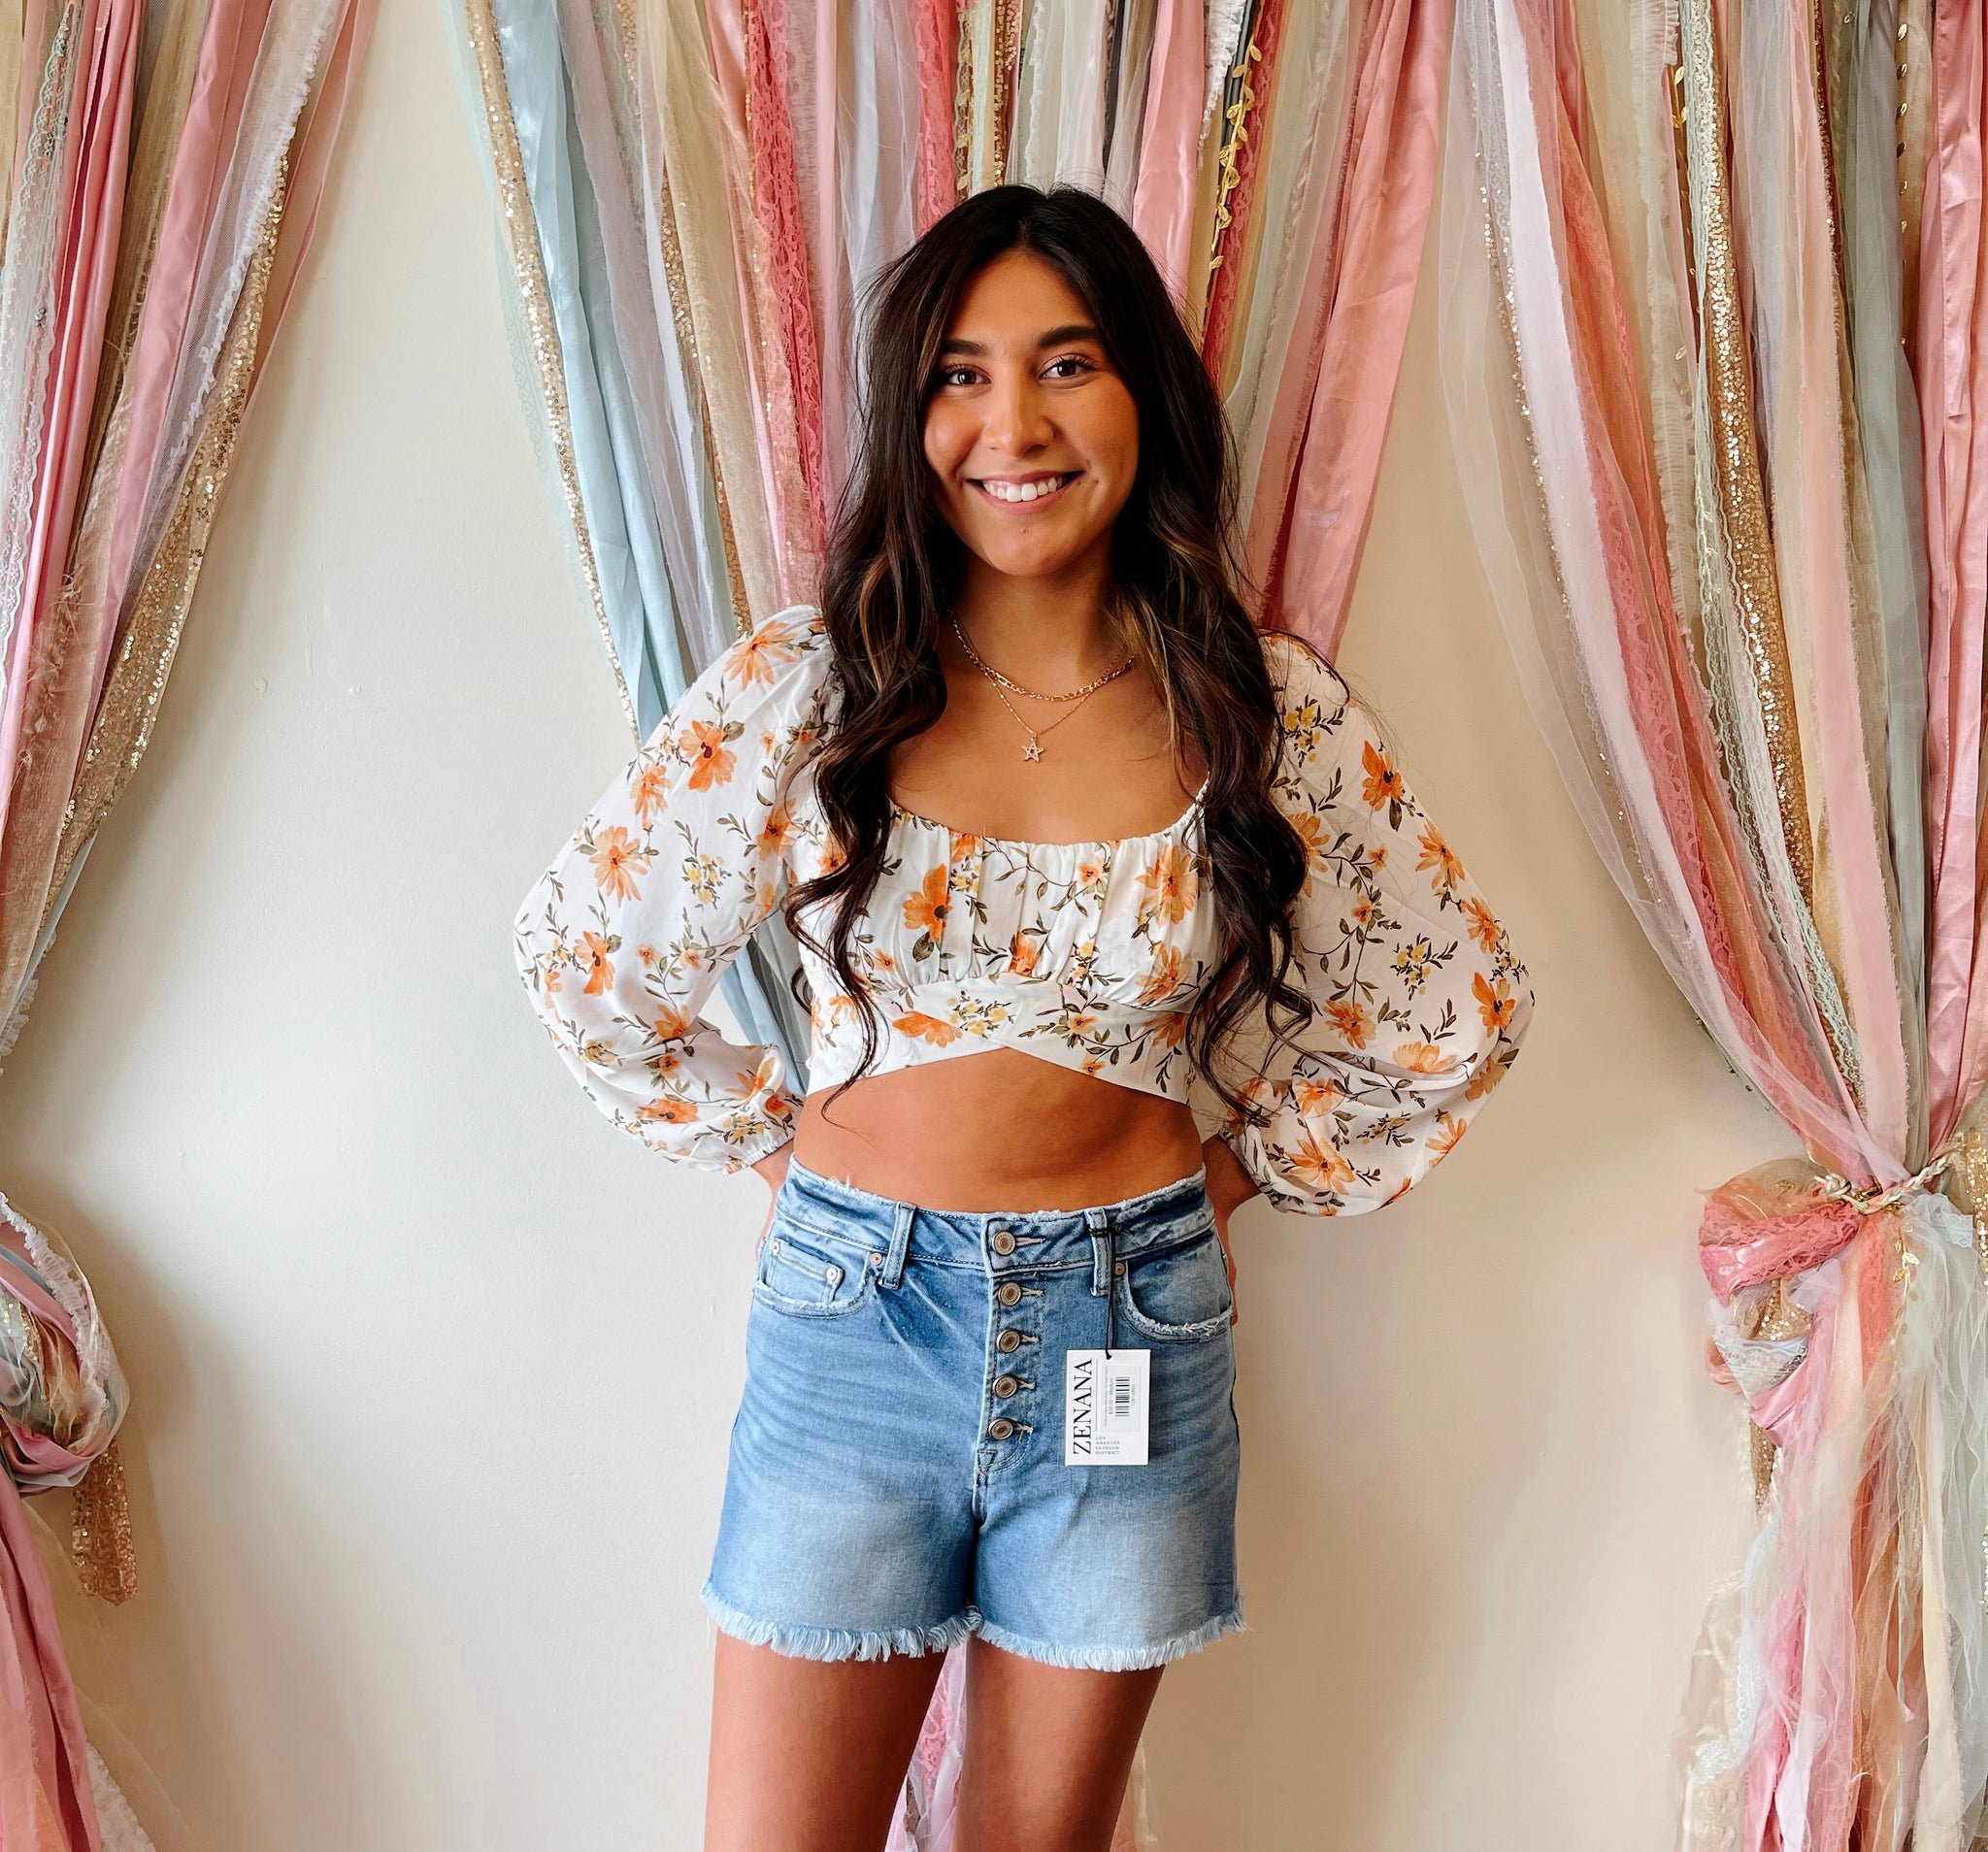 Just Peachy Ivory Floral Top